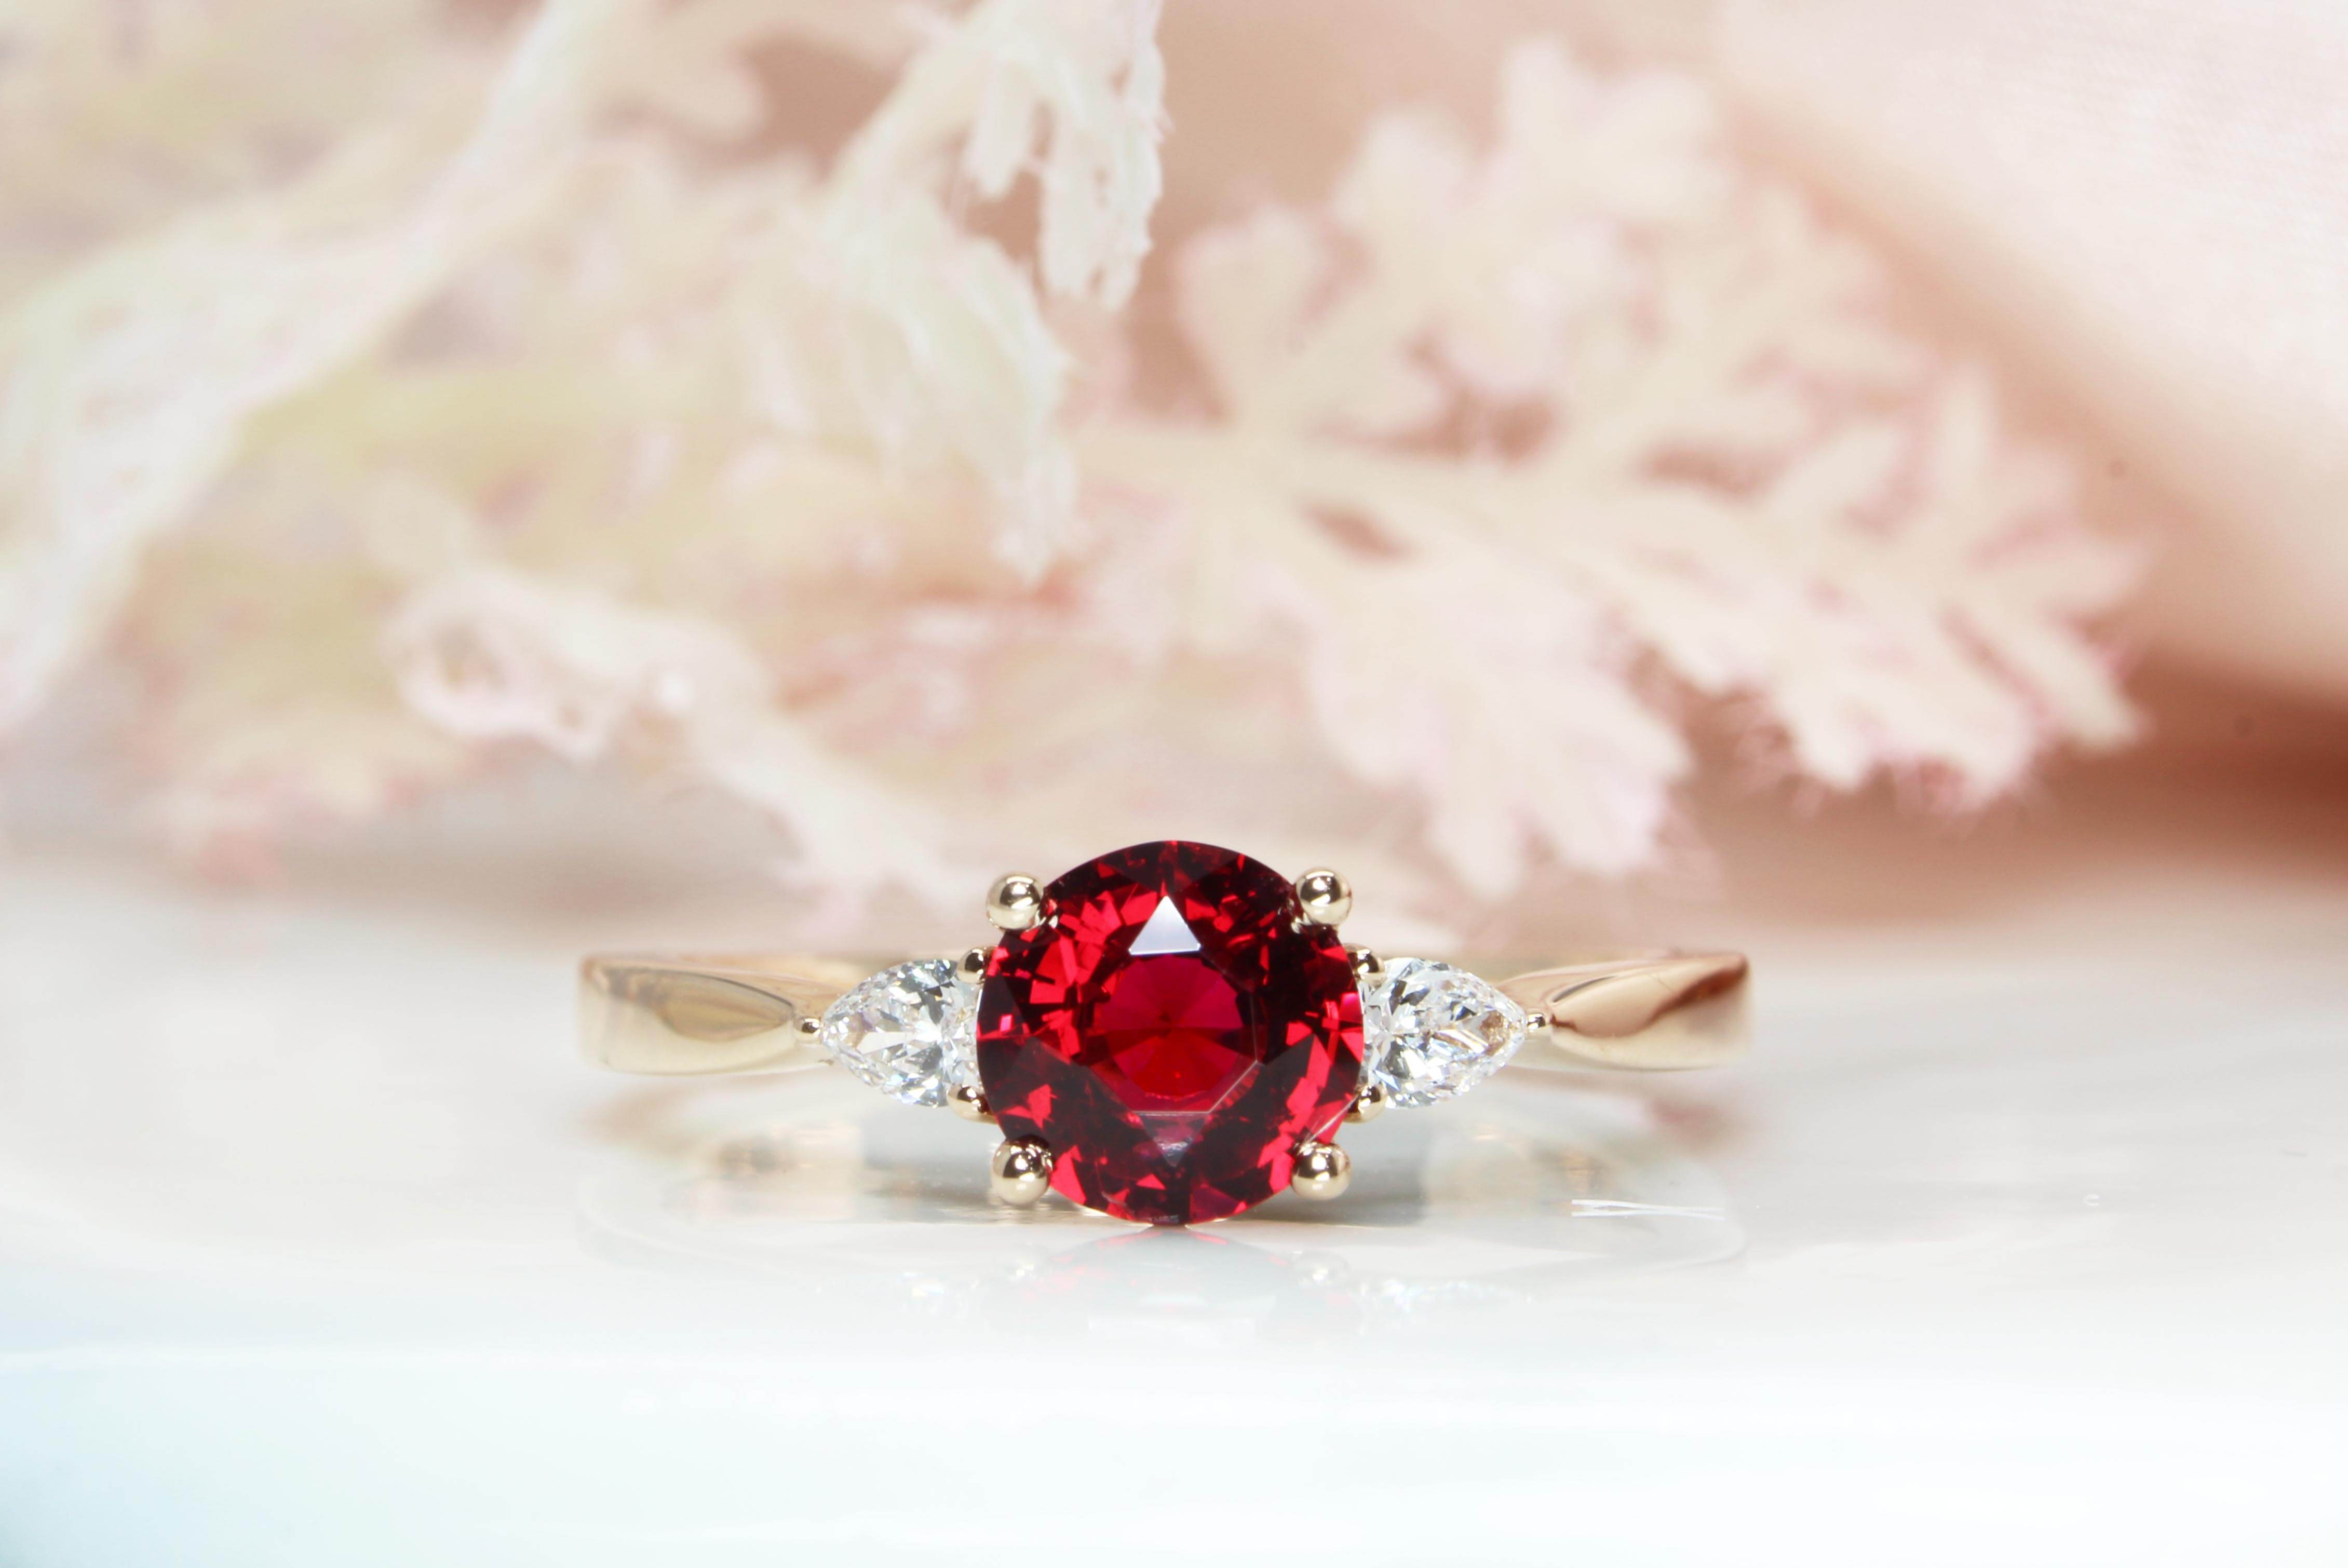 Red Spinel custom design with two pear shape diamonds, crafted in rose gold, the detailing on the side bands of the engagement ring for a proposal | Local Singapore custom made jeweller in engagement ring and wedding jewellery with spinel gemstone Proposal Ring.